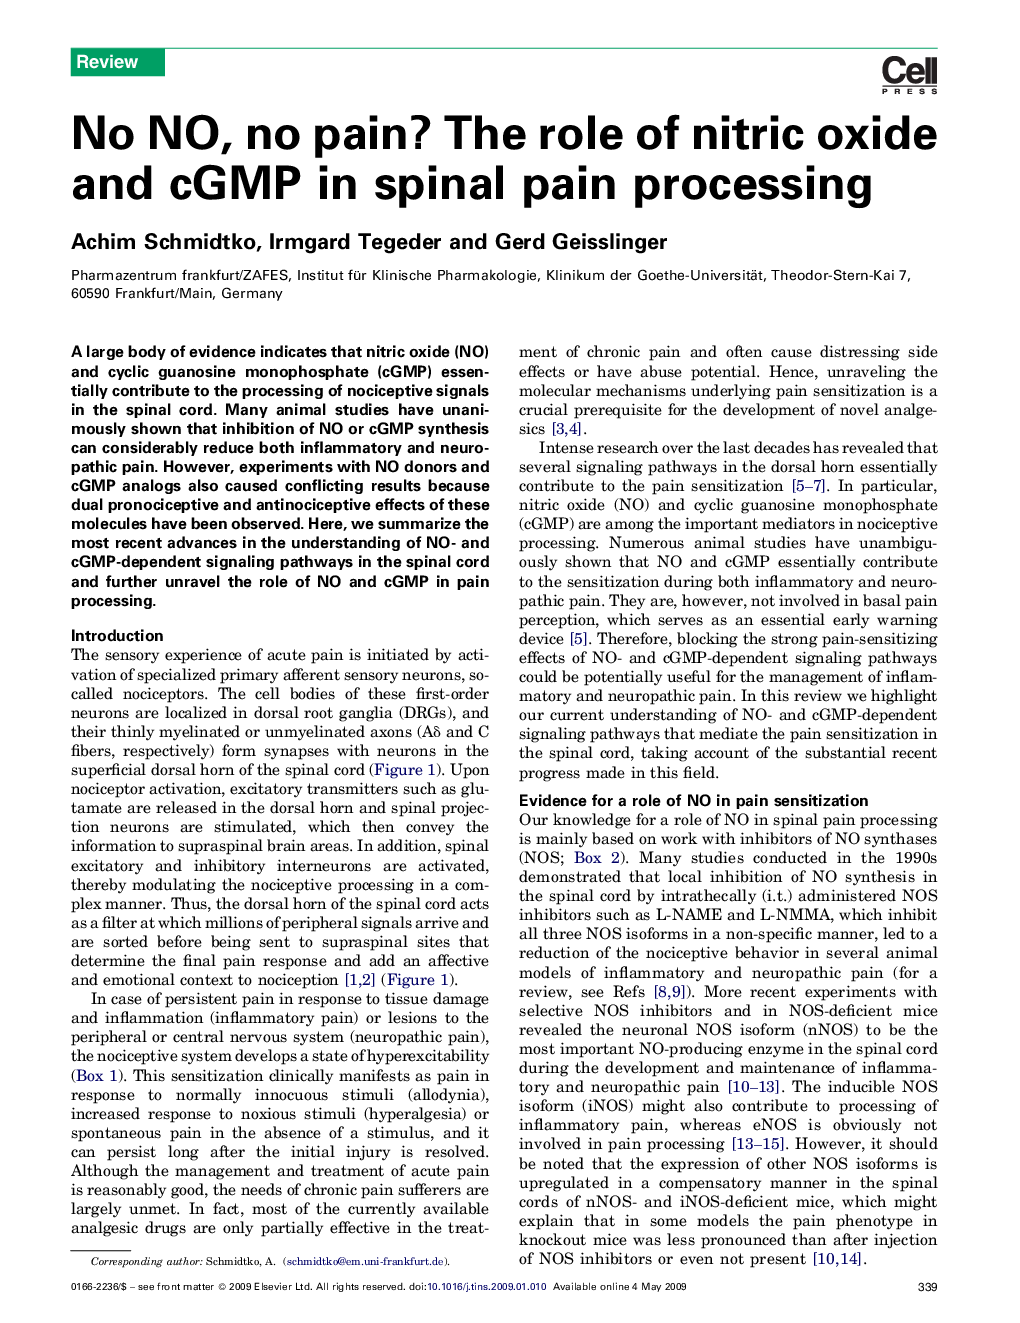 No NO, no pain? The role of nitric oxide and cGMP in spinal pain processing